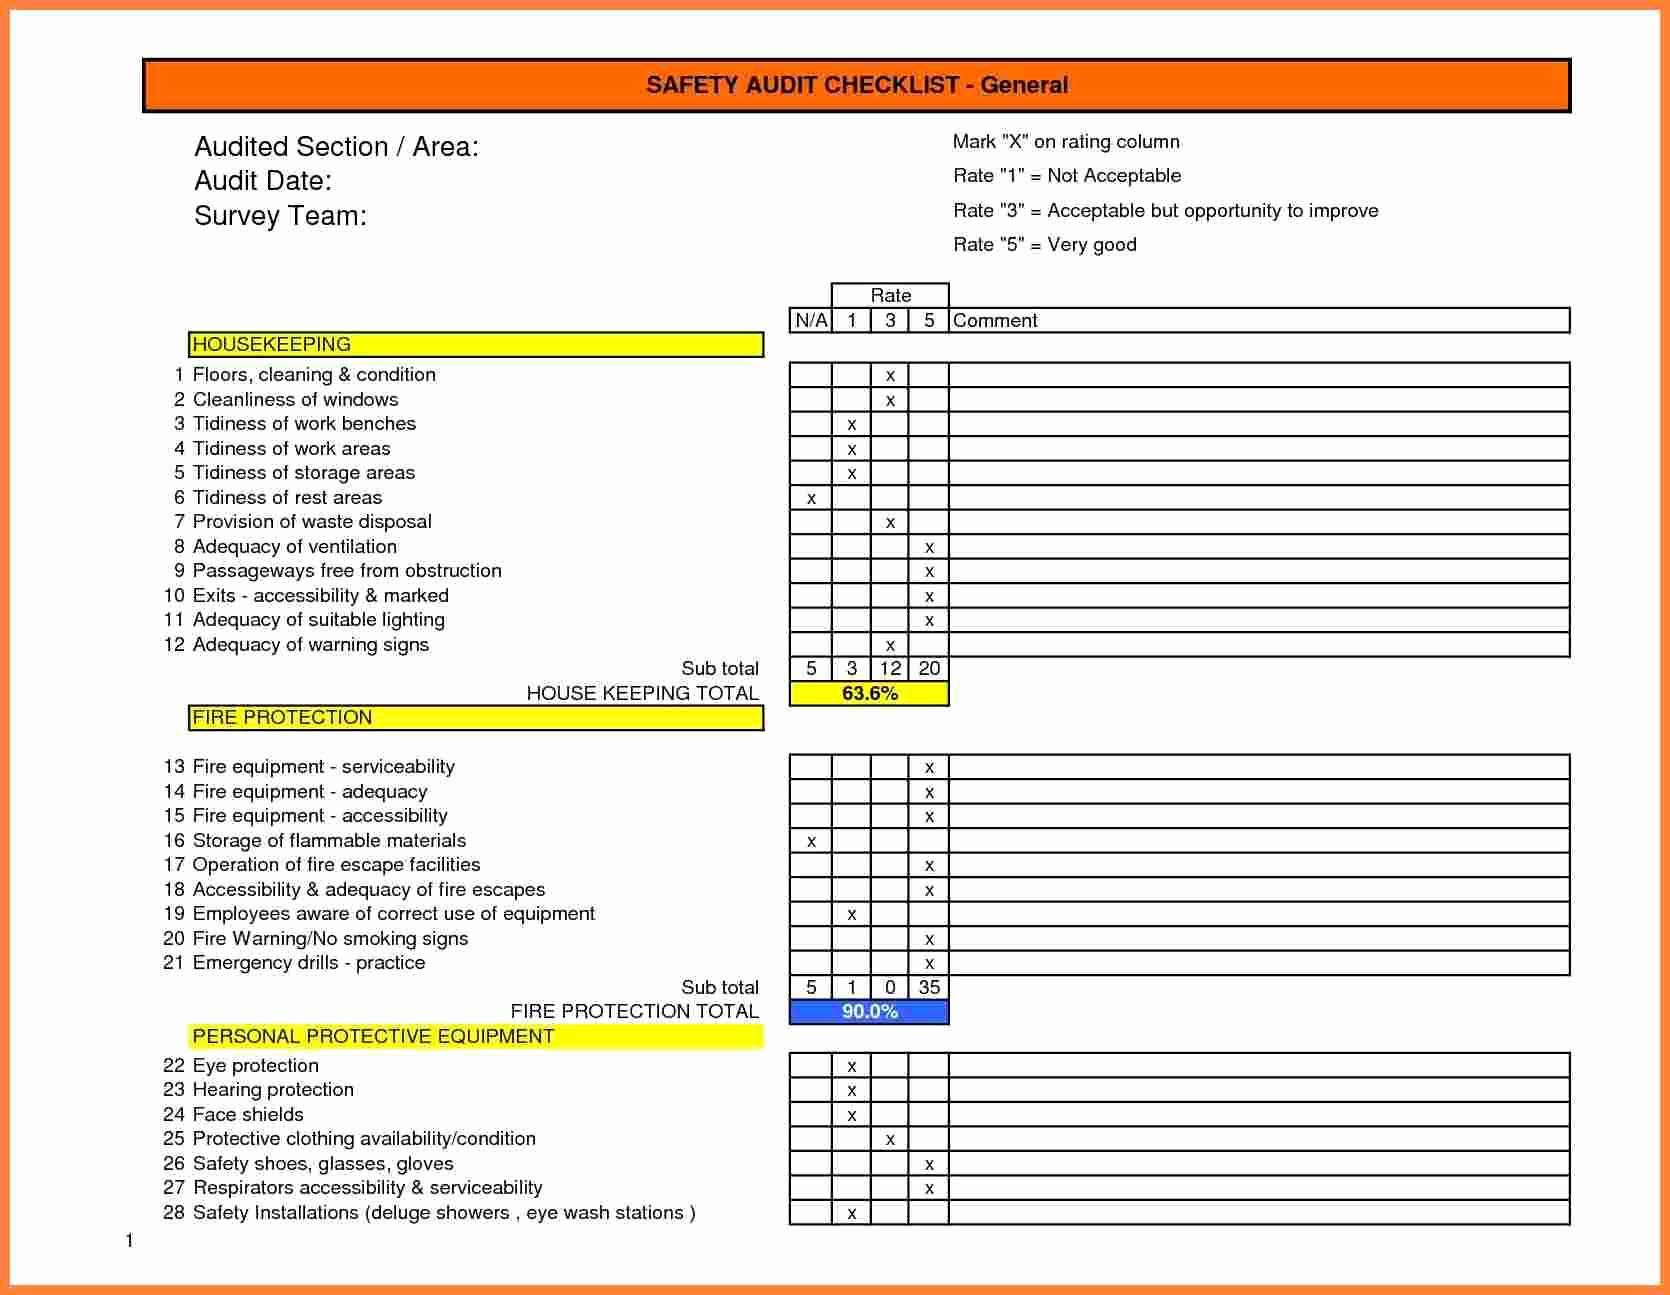 Iso Audit Report Template Lovely 23 Of Audit Questionnaire Safety Audit Inspection Checklist Checklist Template